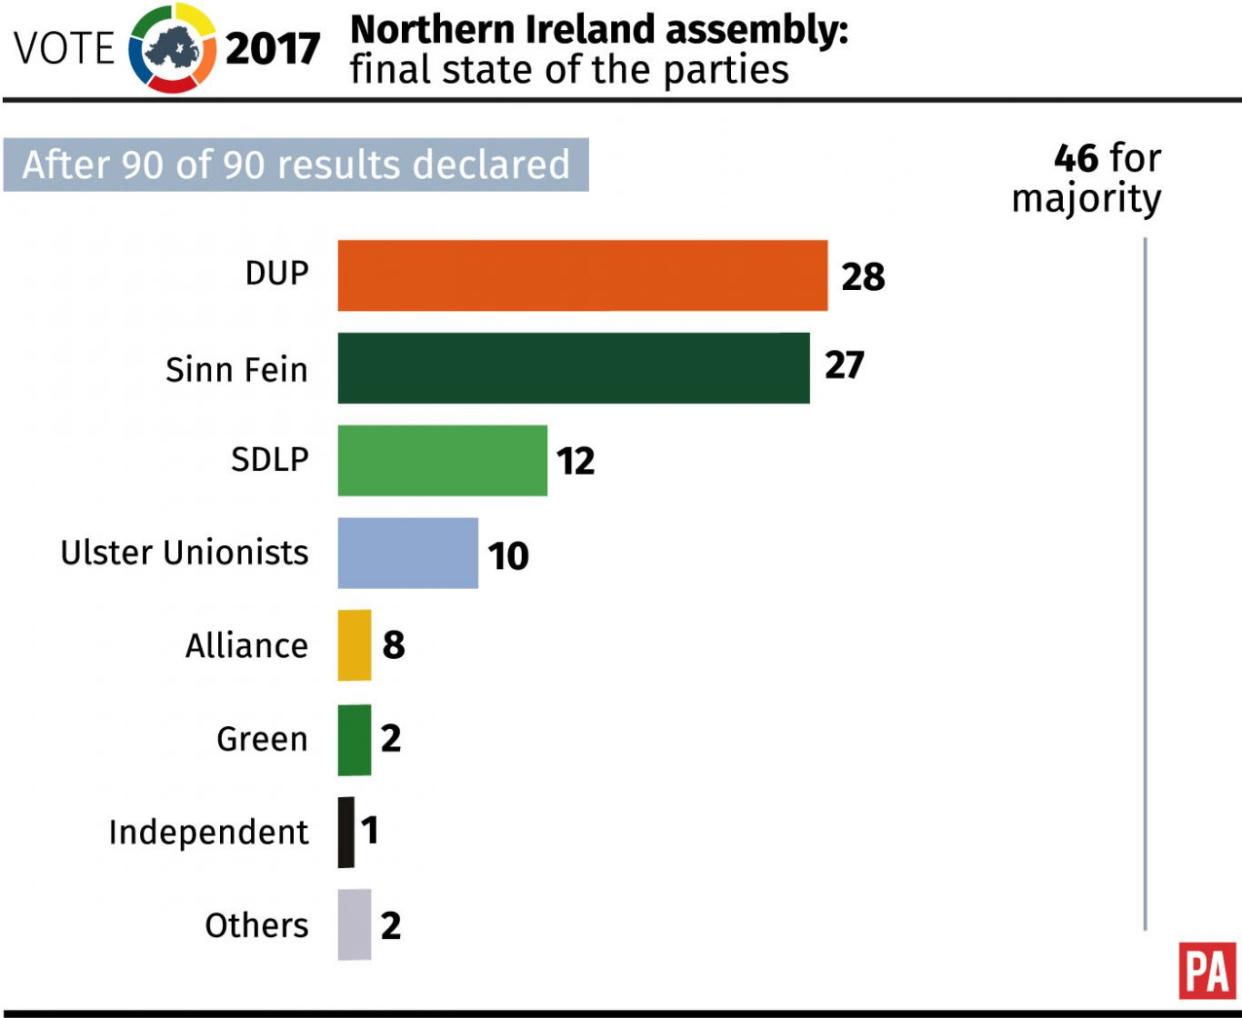 Northern Ireland assembly: State of the parties